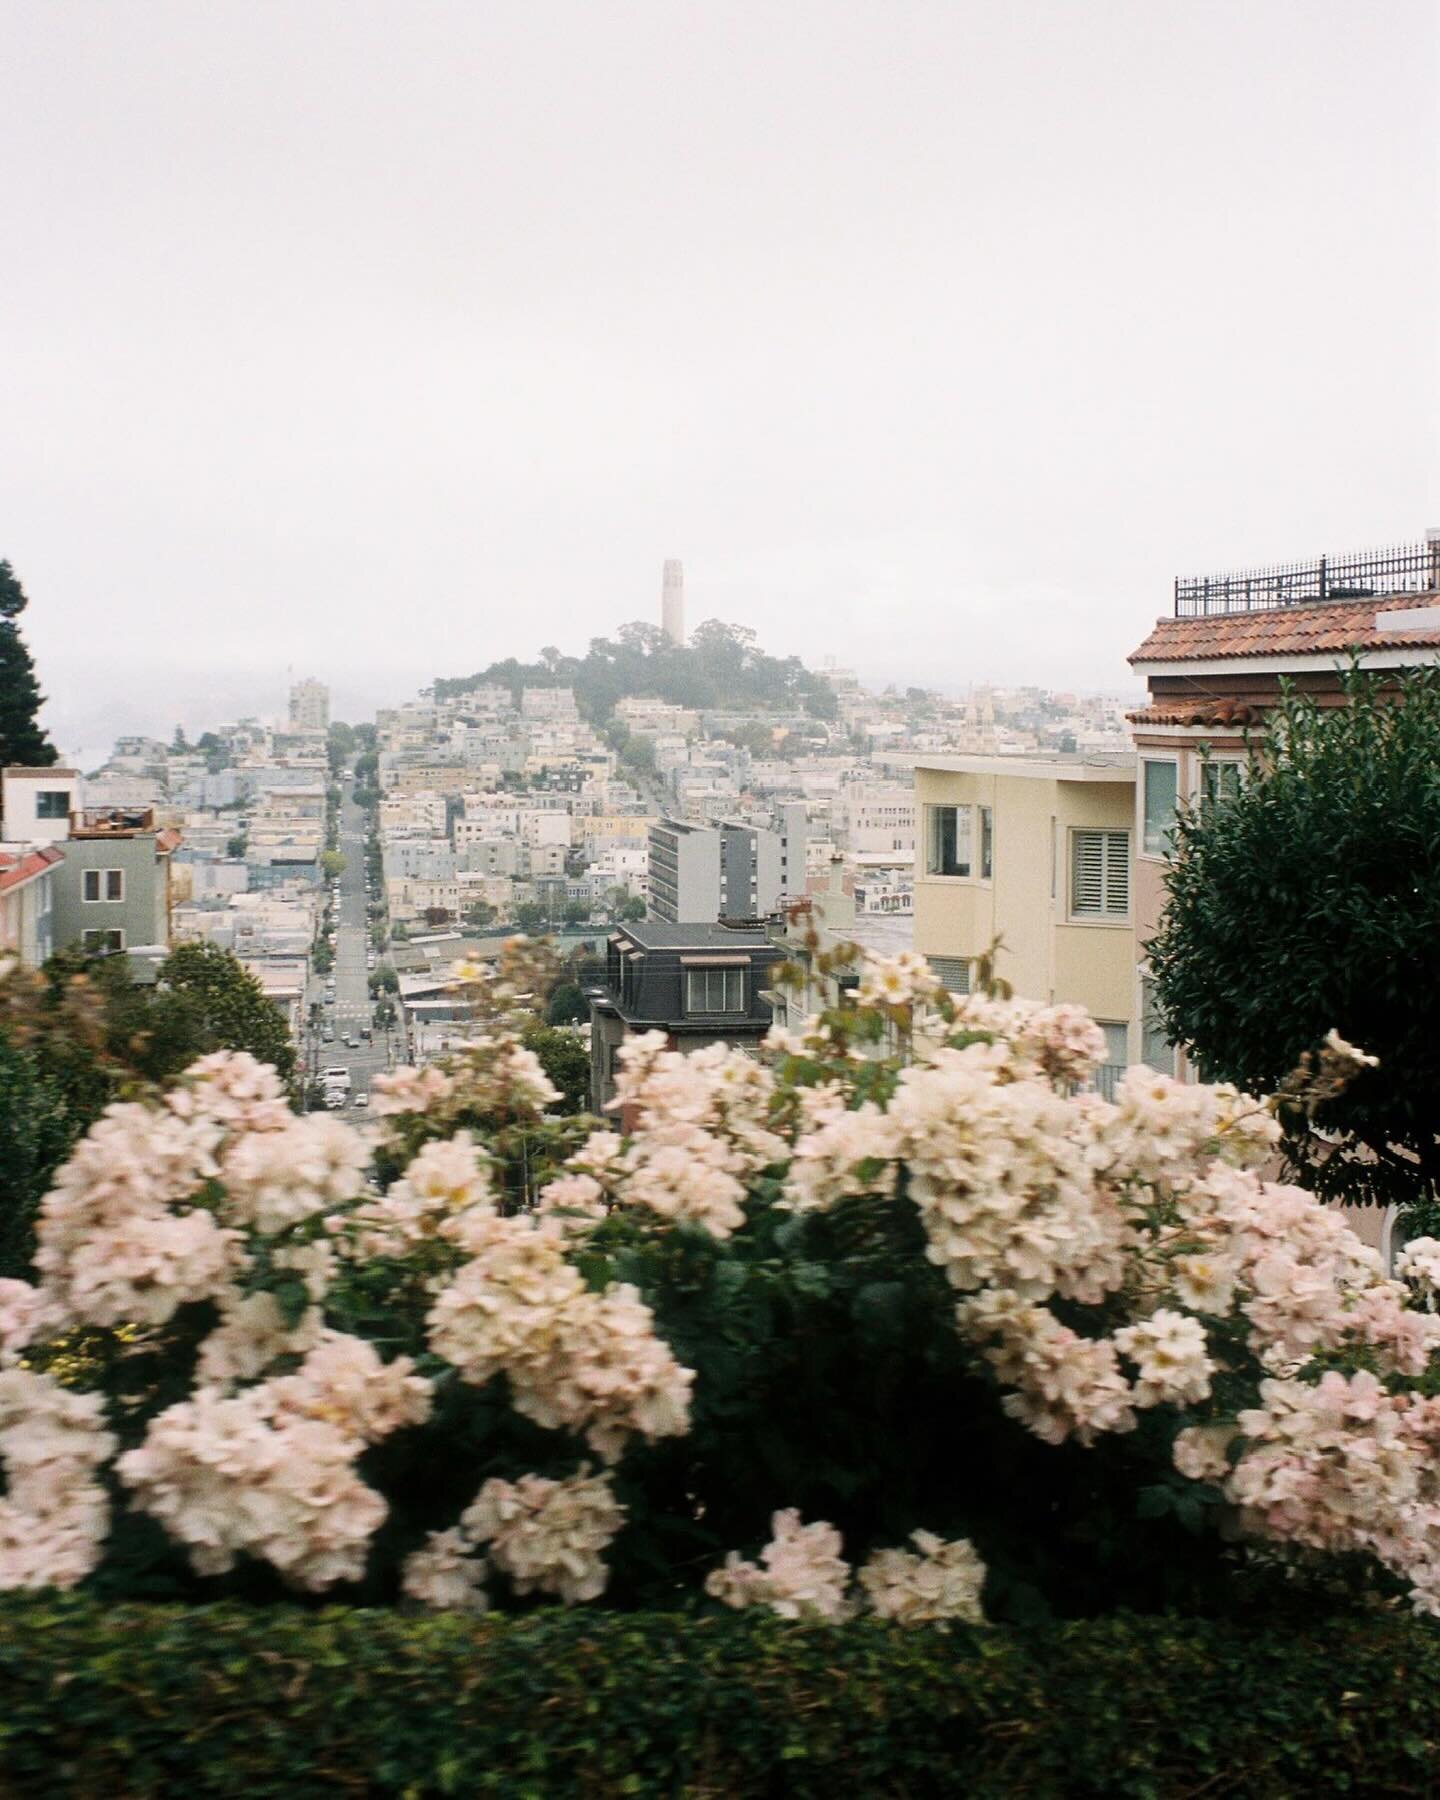 favorite views in sf 💌 on 35 mm 

#filmphotography #sanfrancisco #35mmfilm #portra400